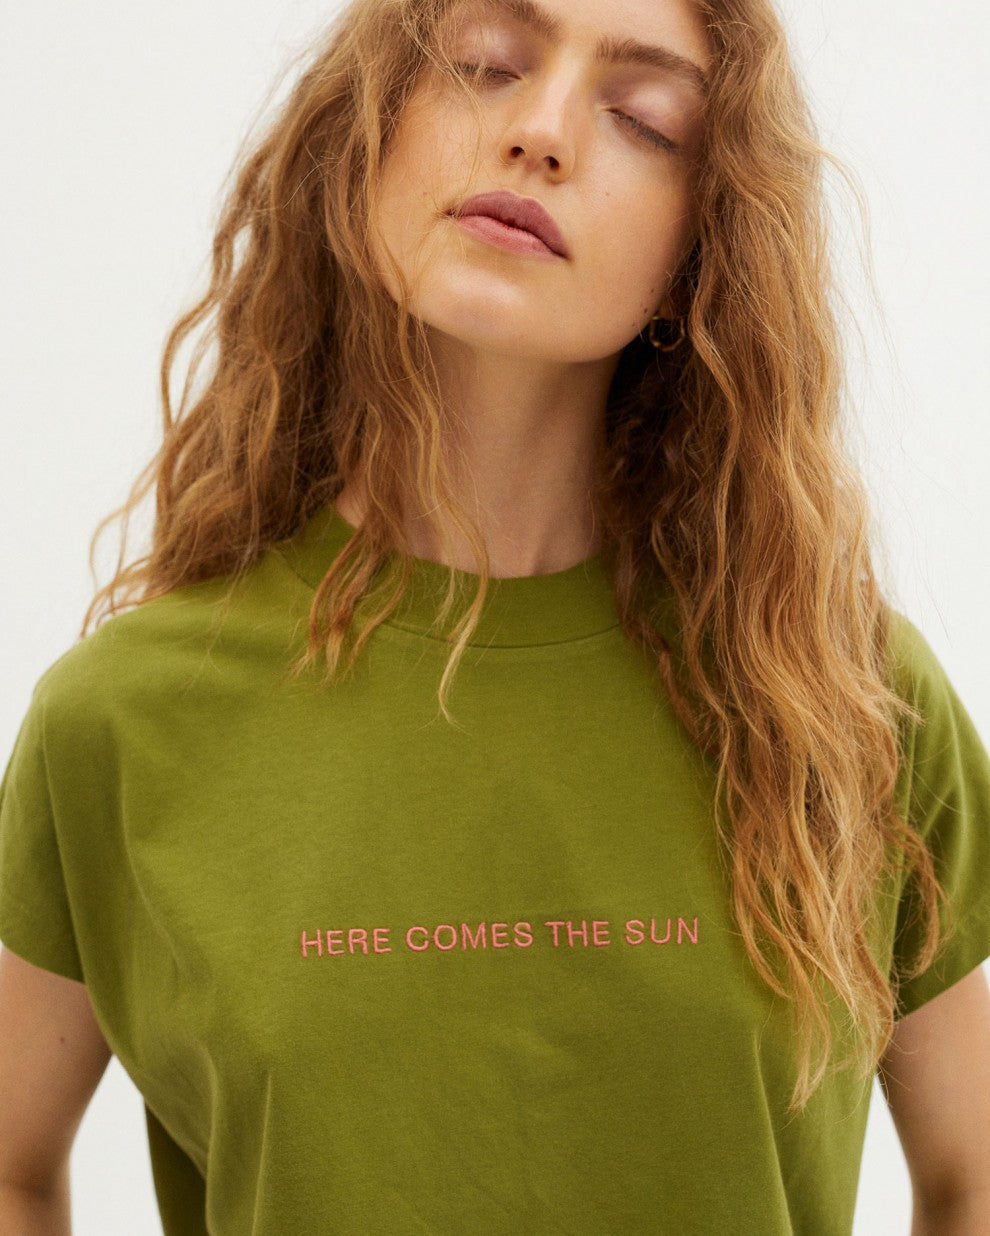 Here comes the sun- T-Shirt Green